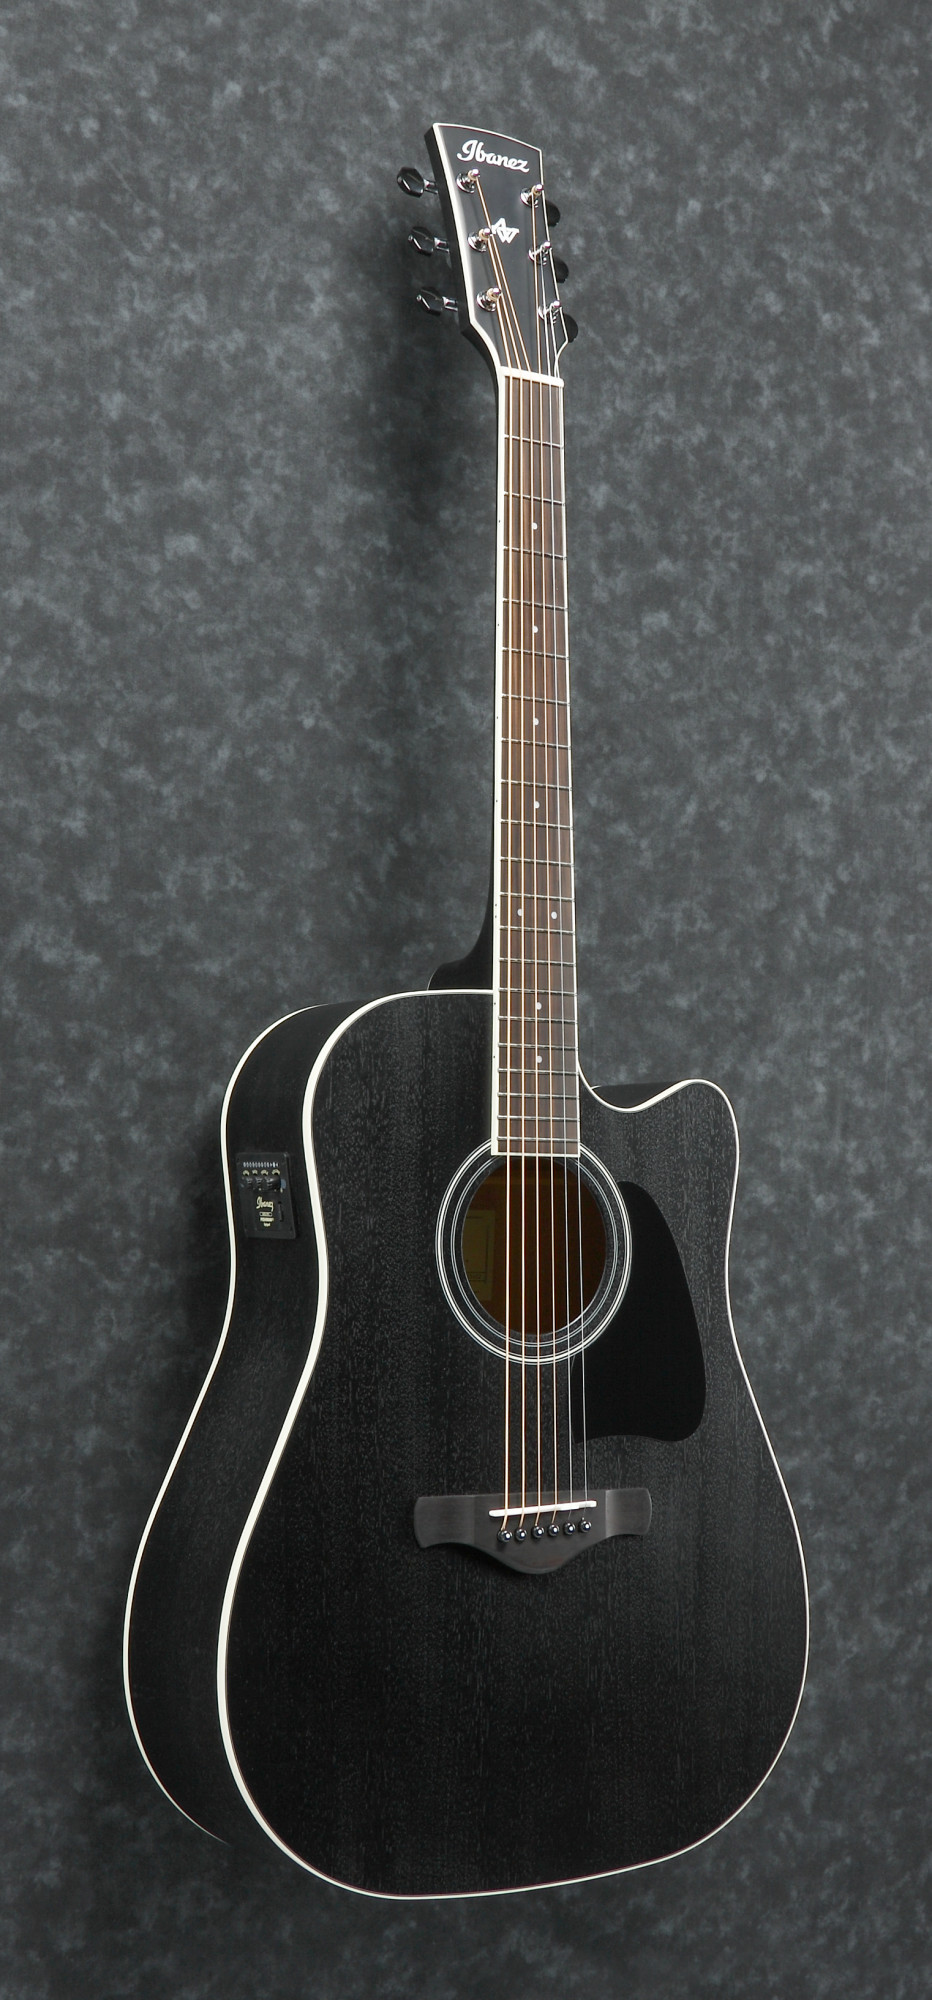 Ibanez AW84CE-WK